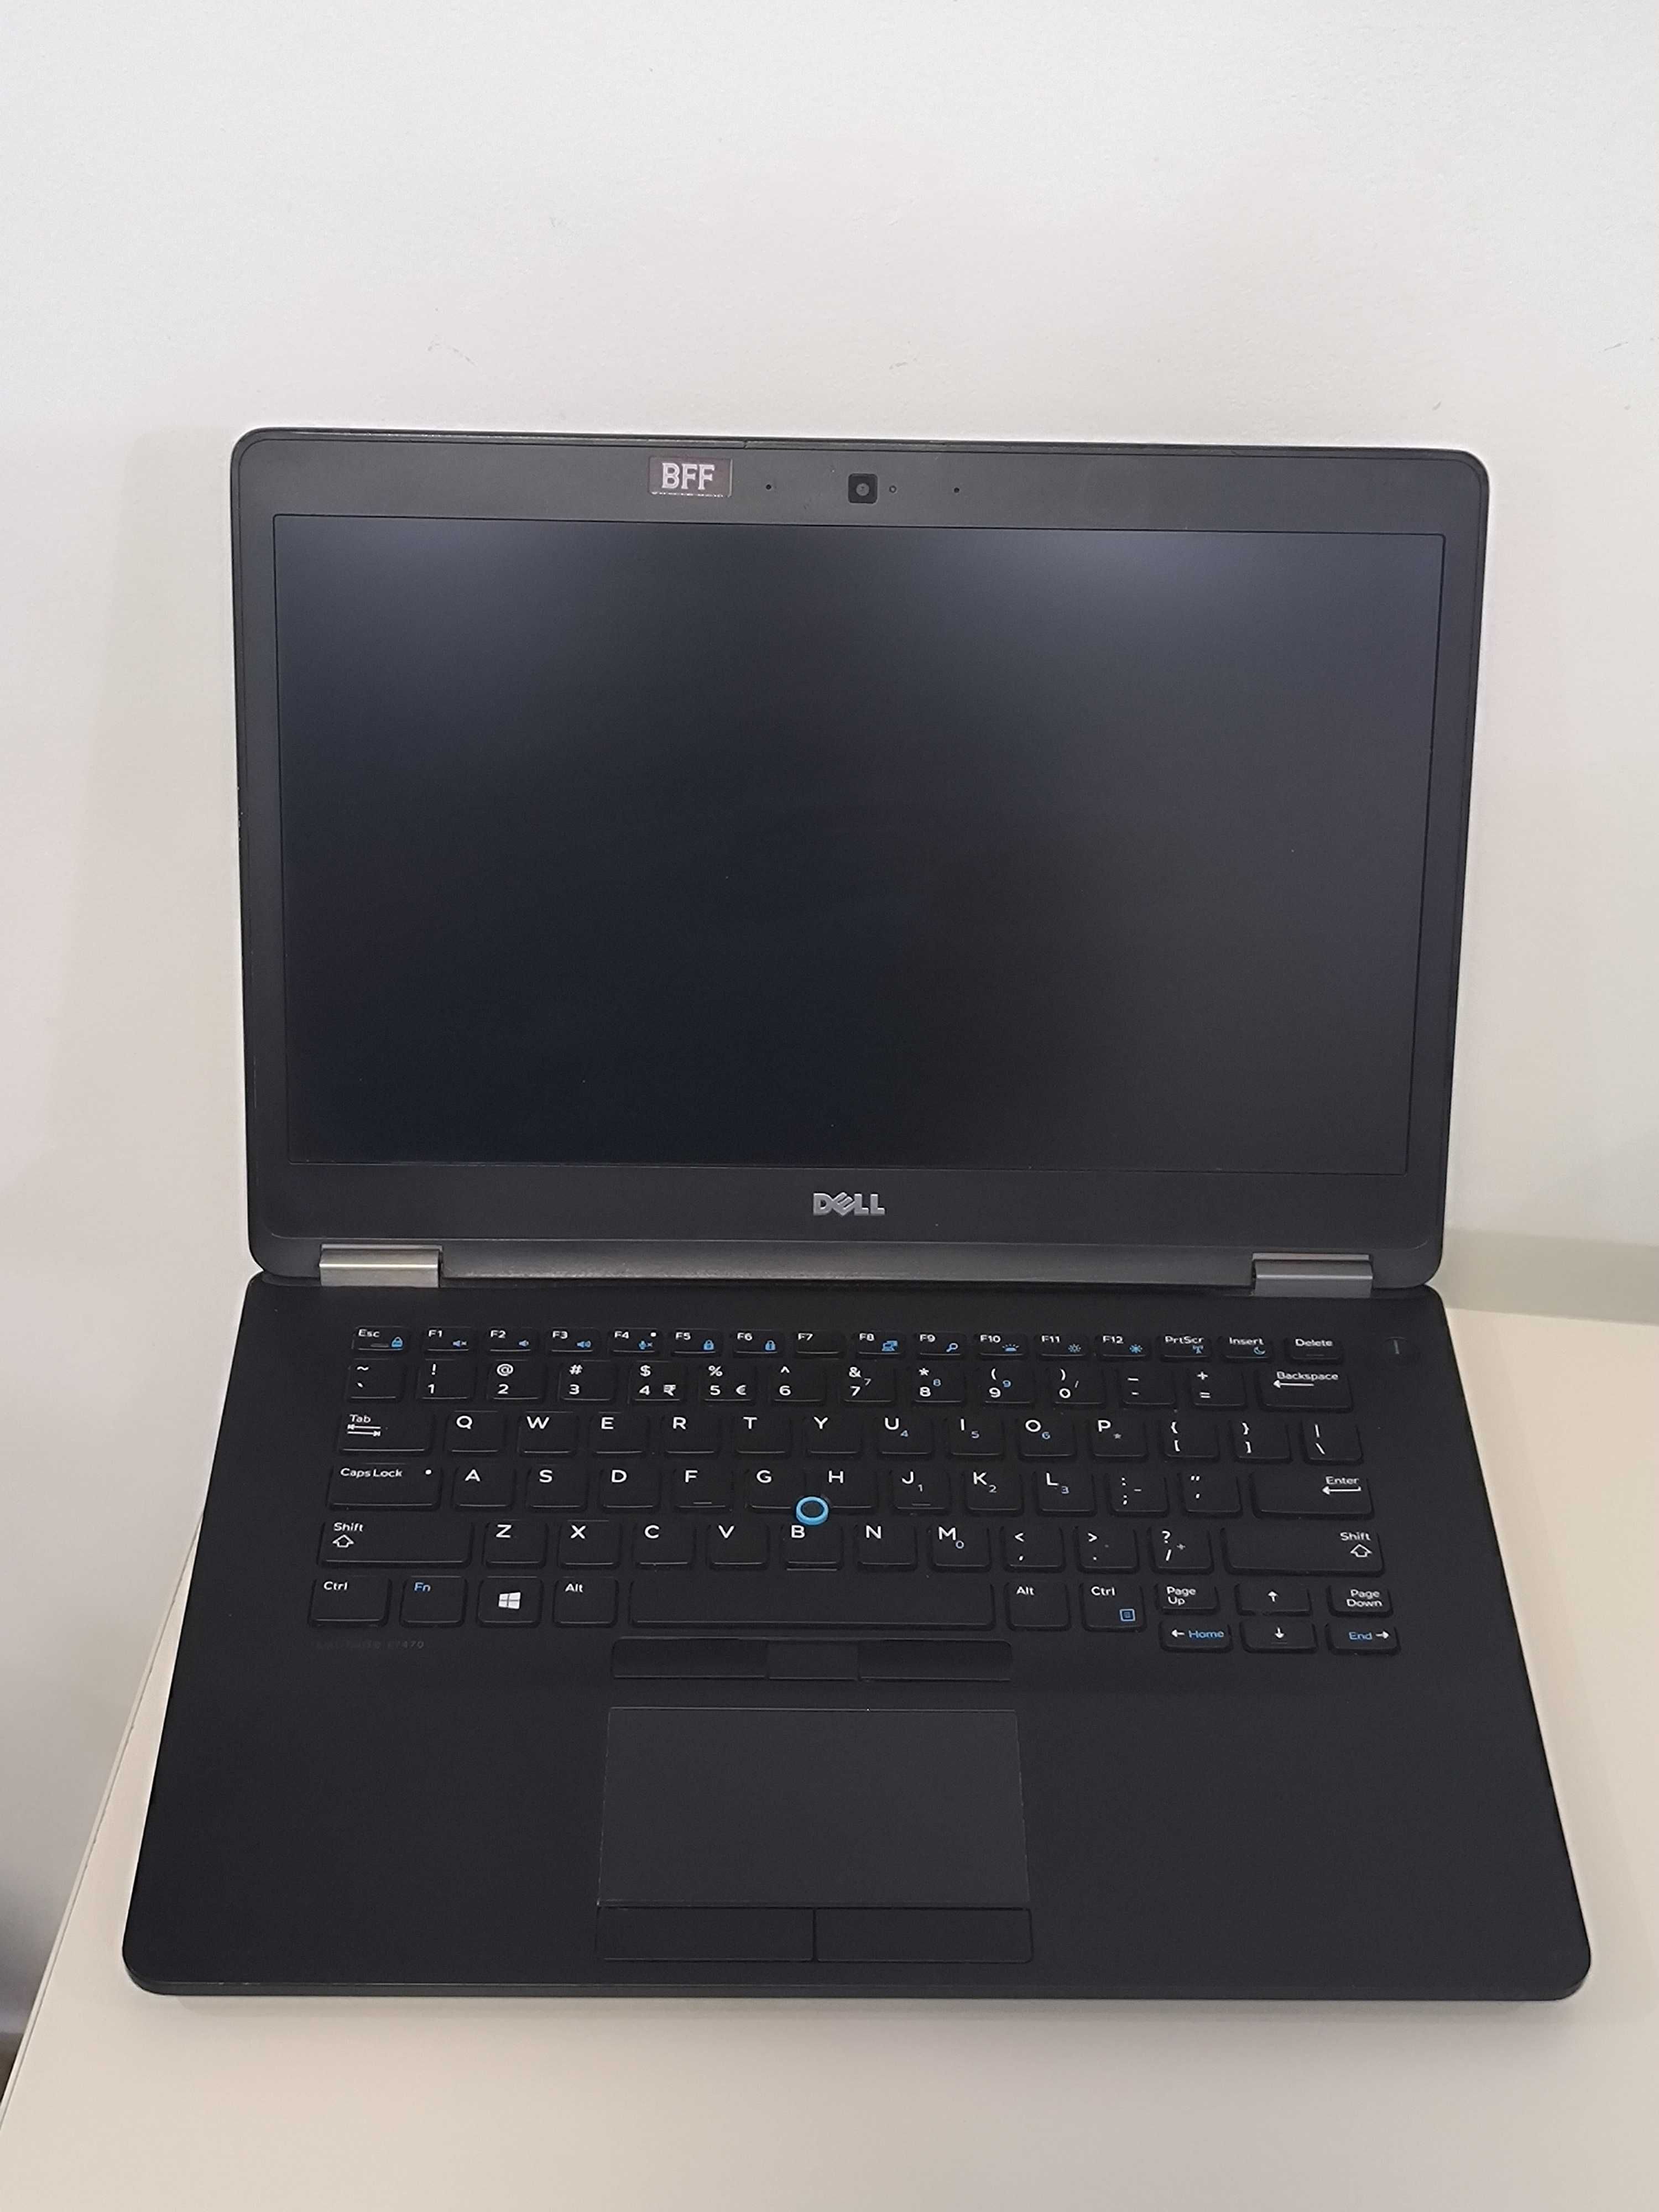 Vand laptop DELL  i5 gen6, 8gb ddr4, Nvme 250gb, baterie 3 ore